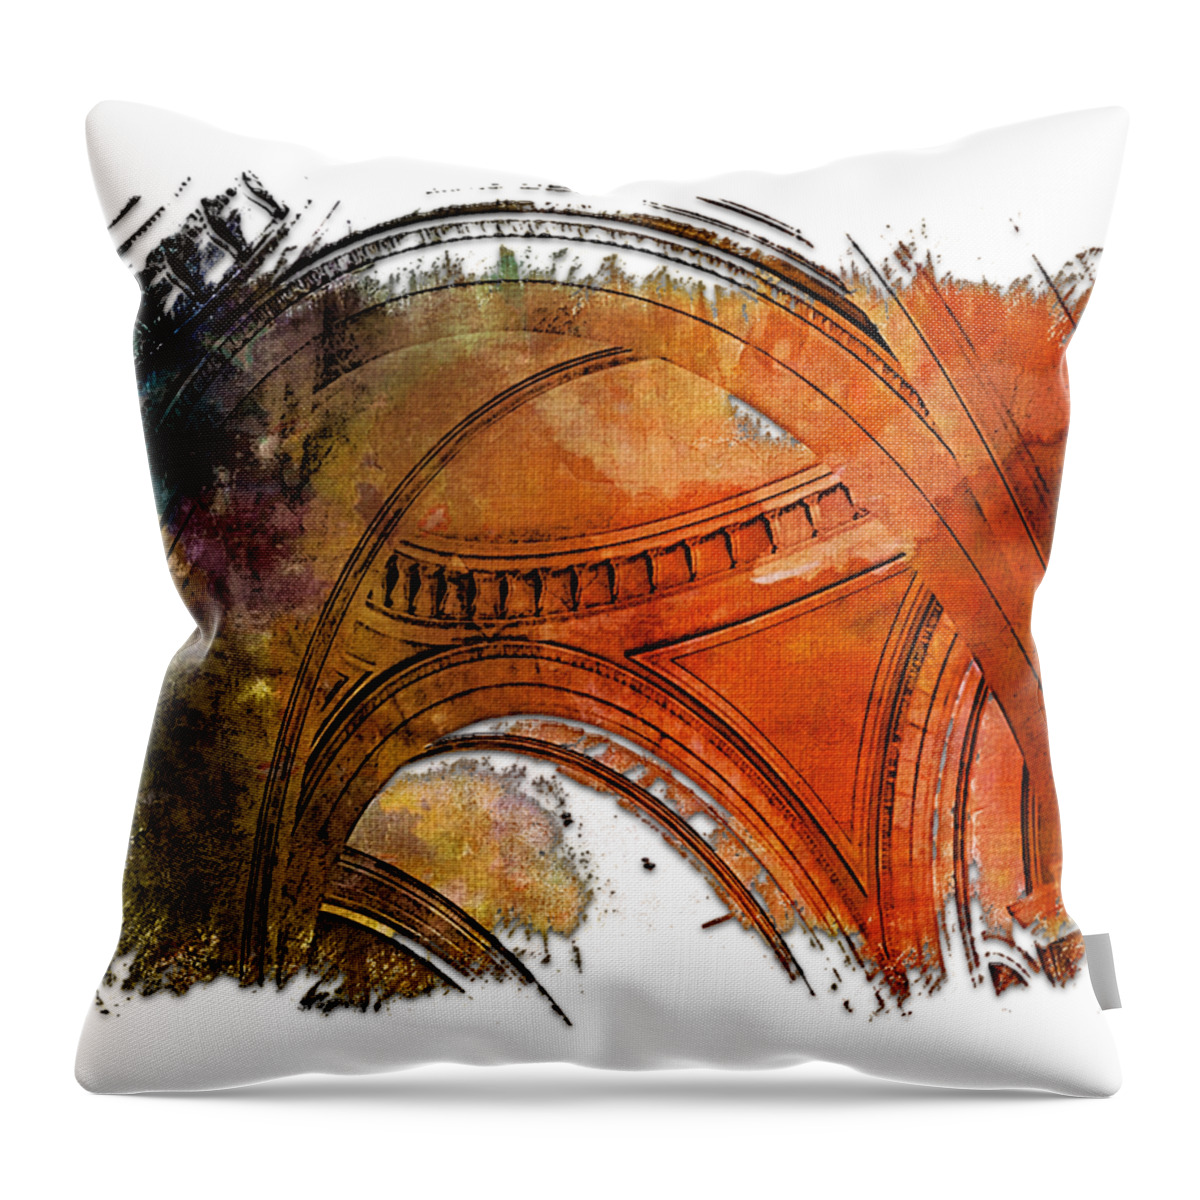 Interior Throw Pillow featuring the photograph Arches Abound Earthy Rainbow 3 Dimensional by DiDesigns Graphics